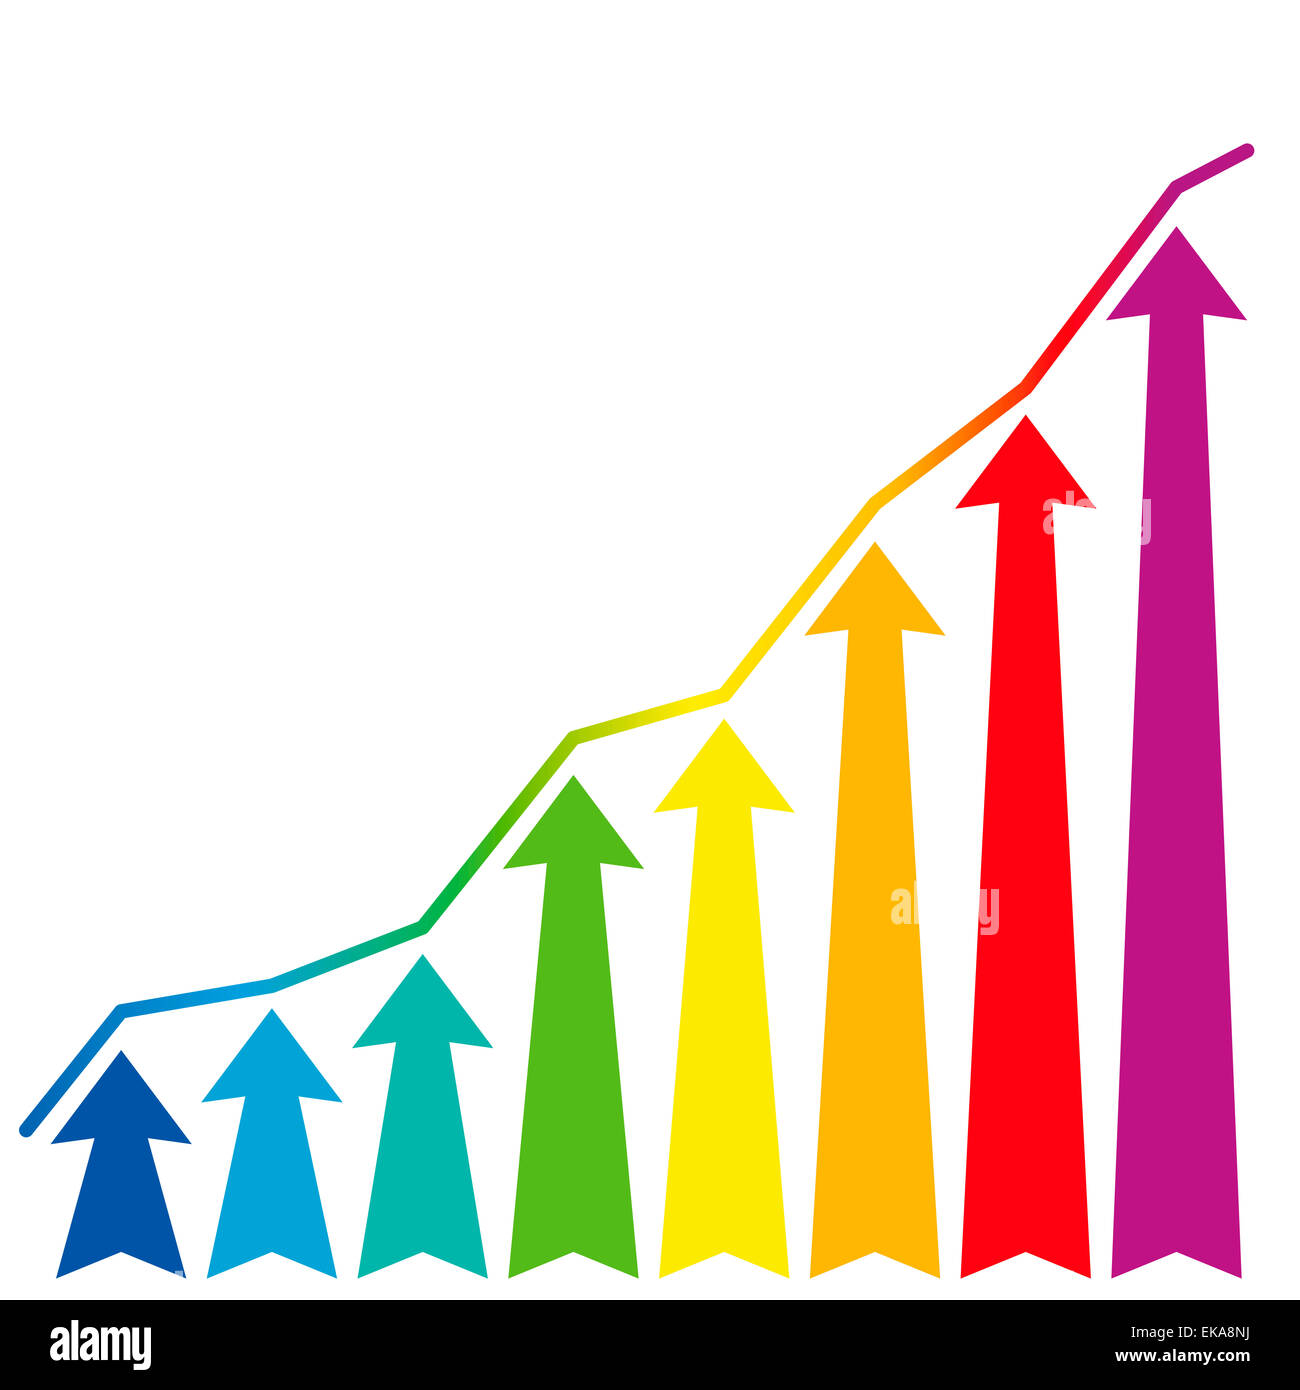 Increase or growth diagram represented with rainbow colored arrows and a rising graph. Stock Photo